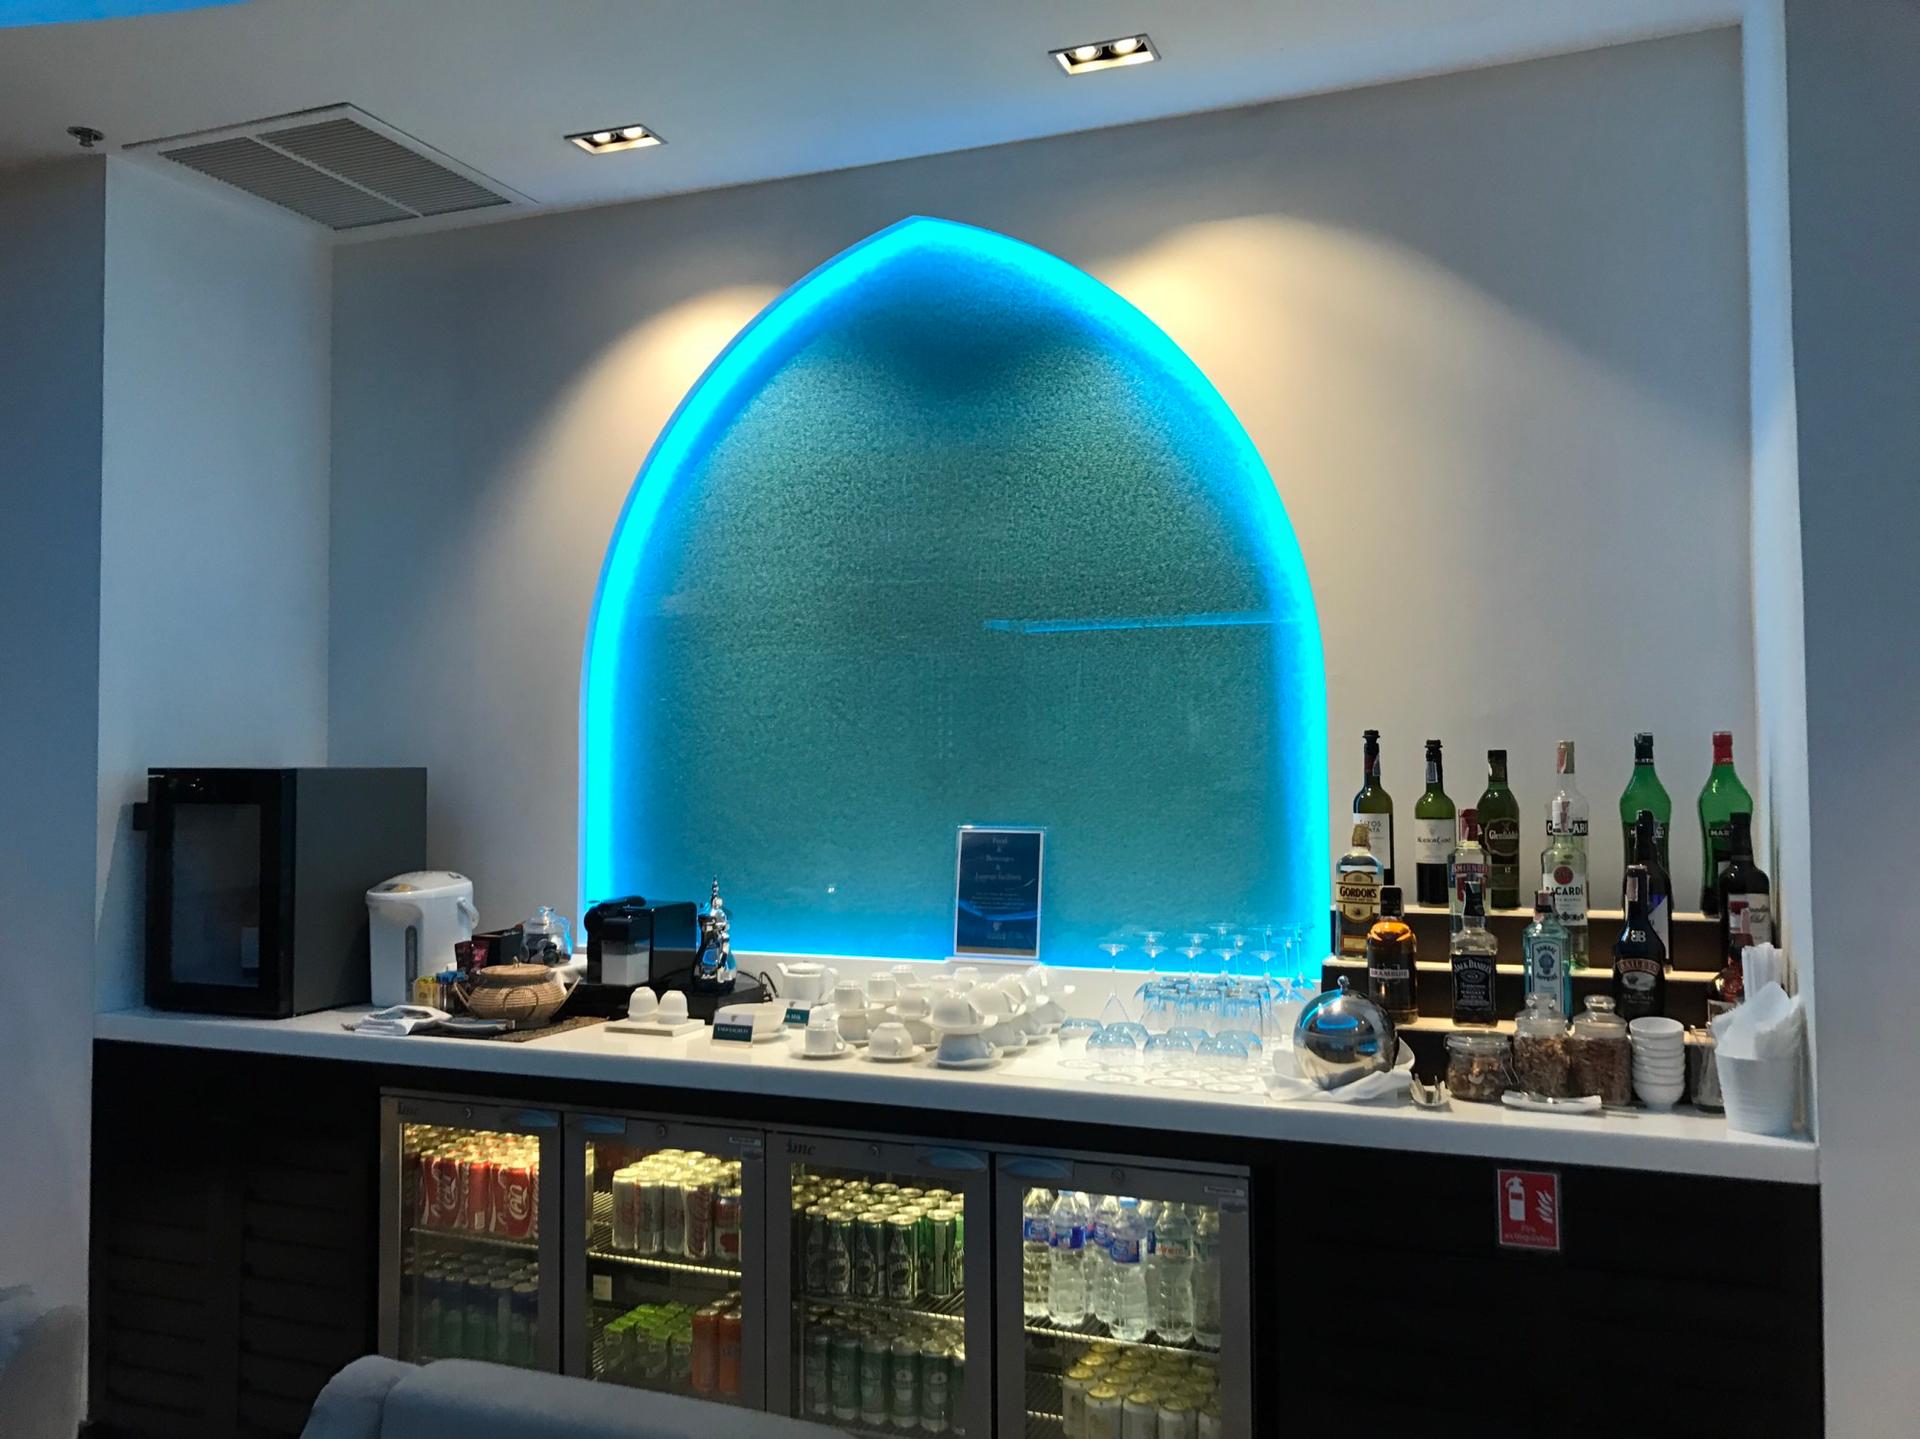 Oman Air First and Business Class Lounge image 13 of 42